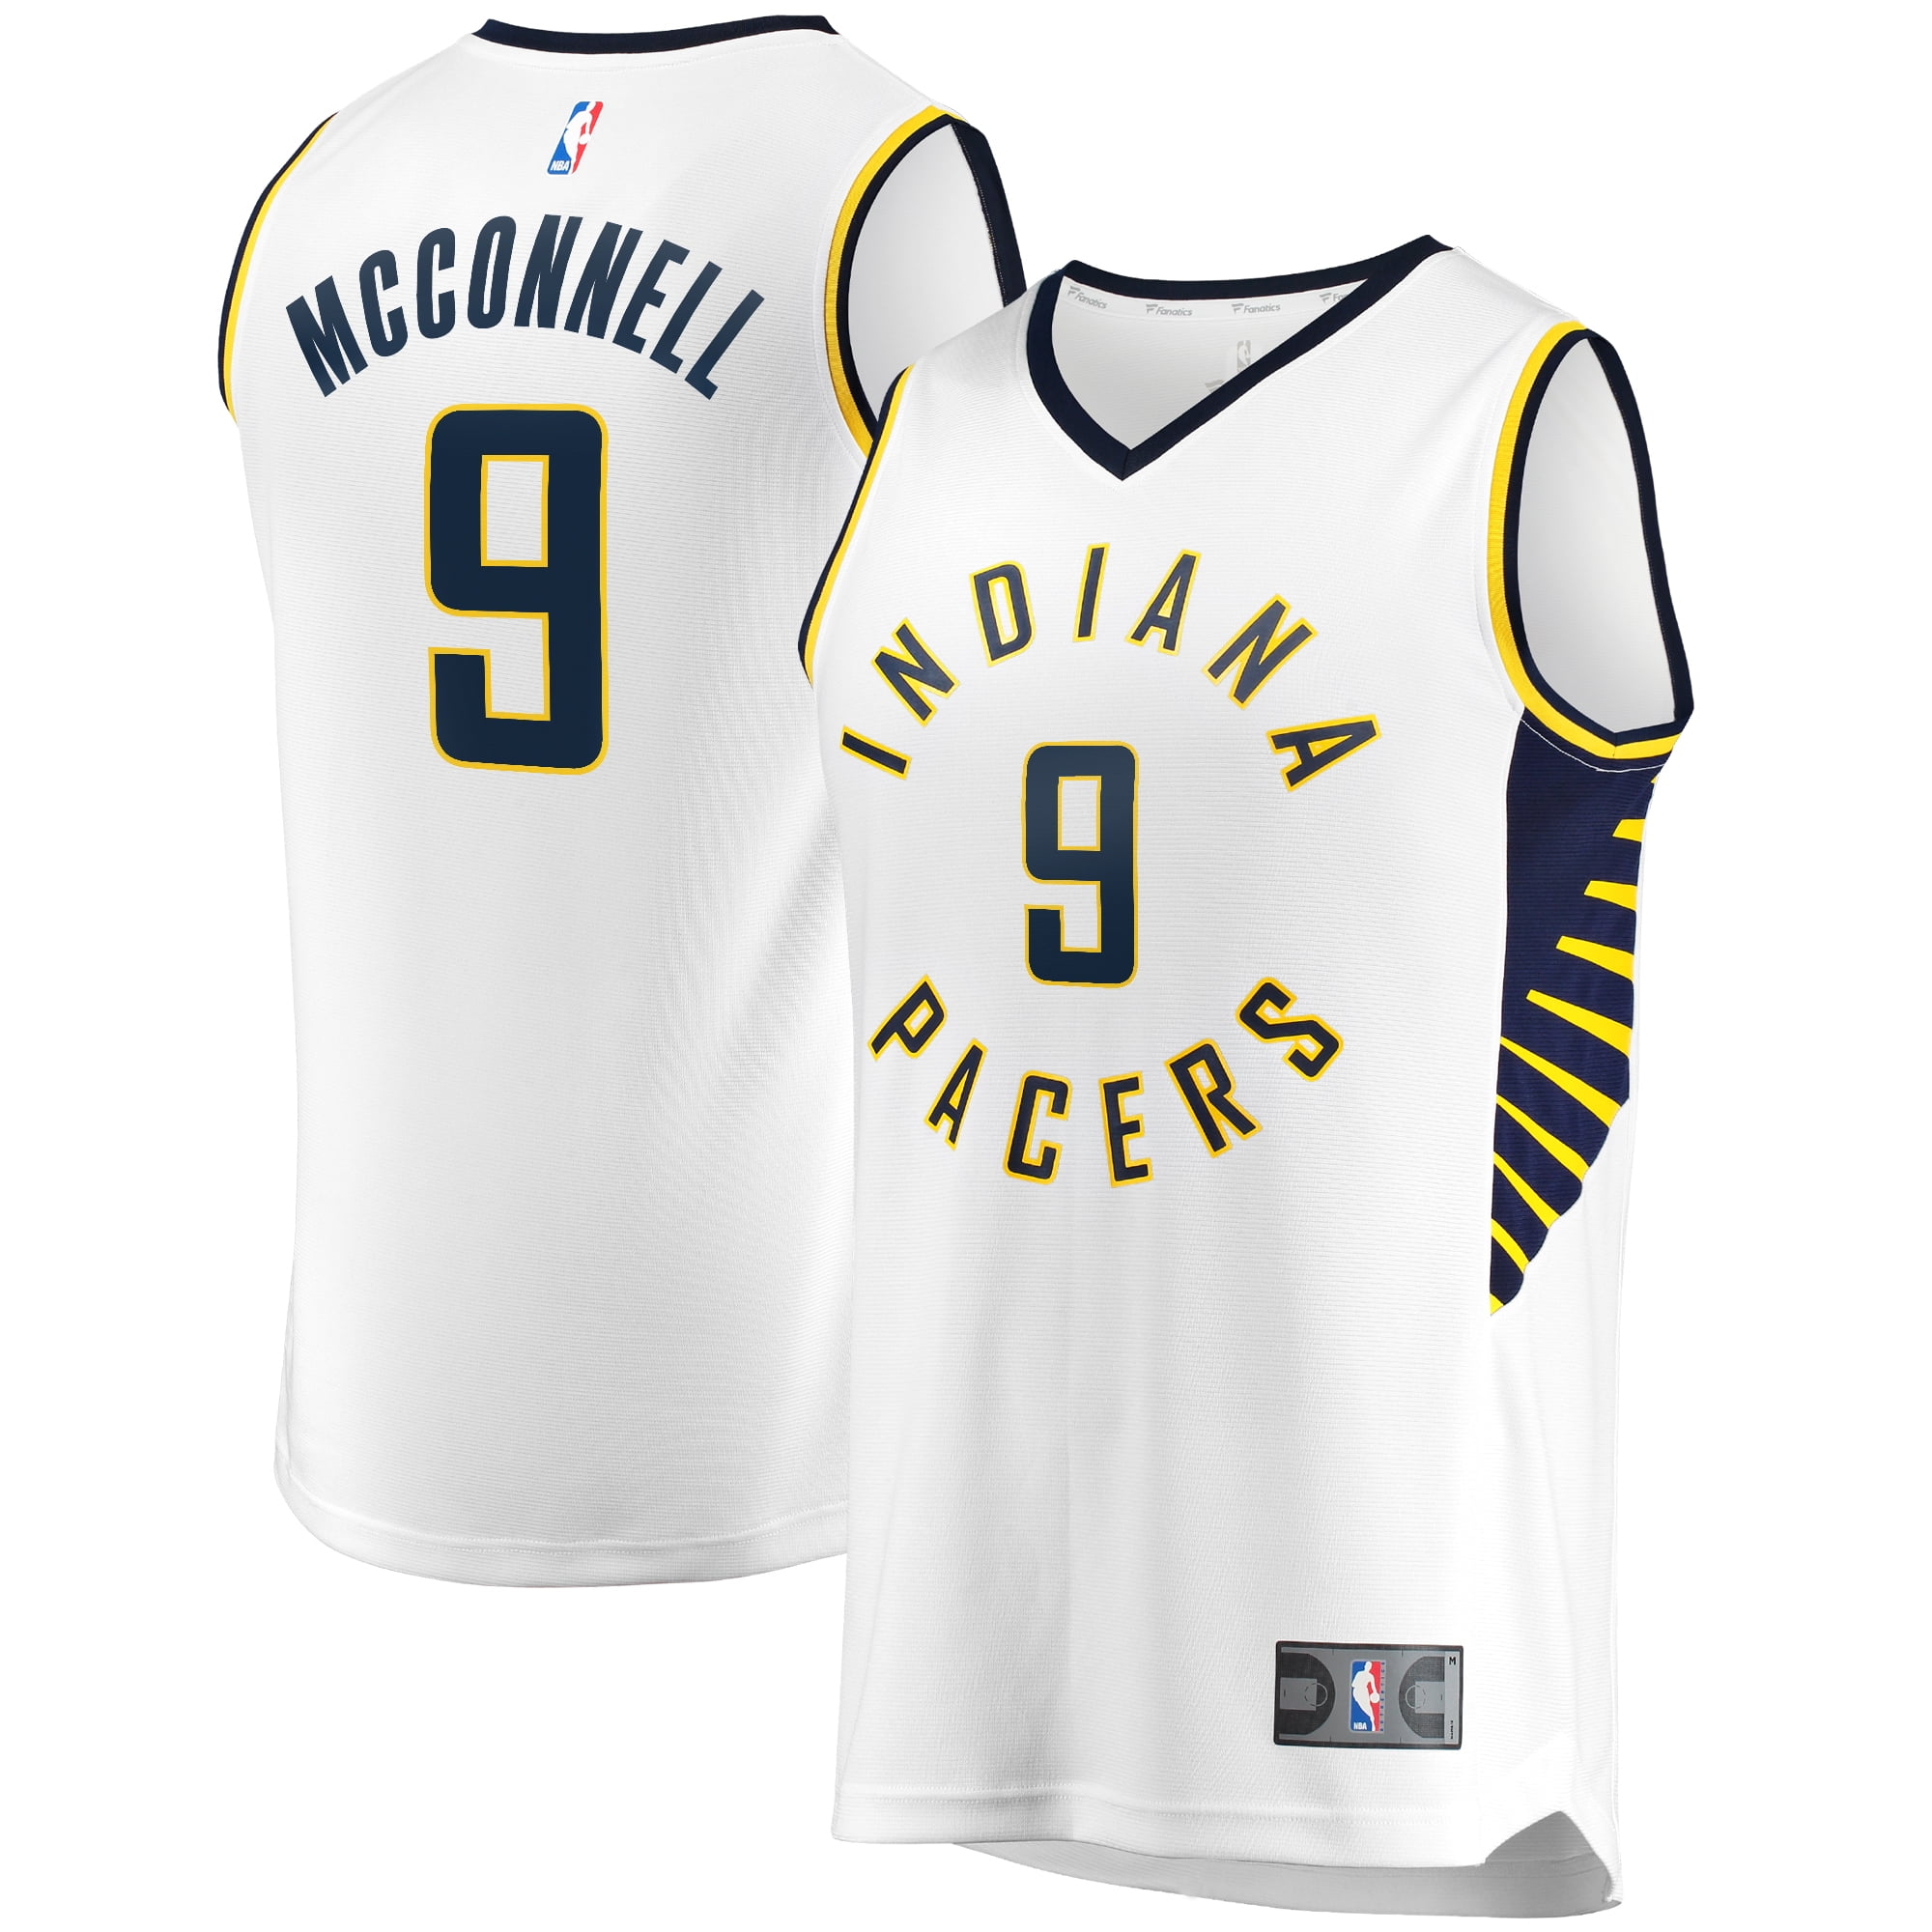 tj mcconnell jersey number